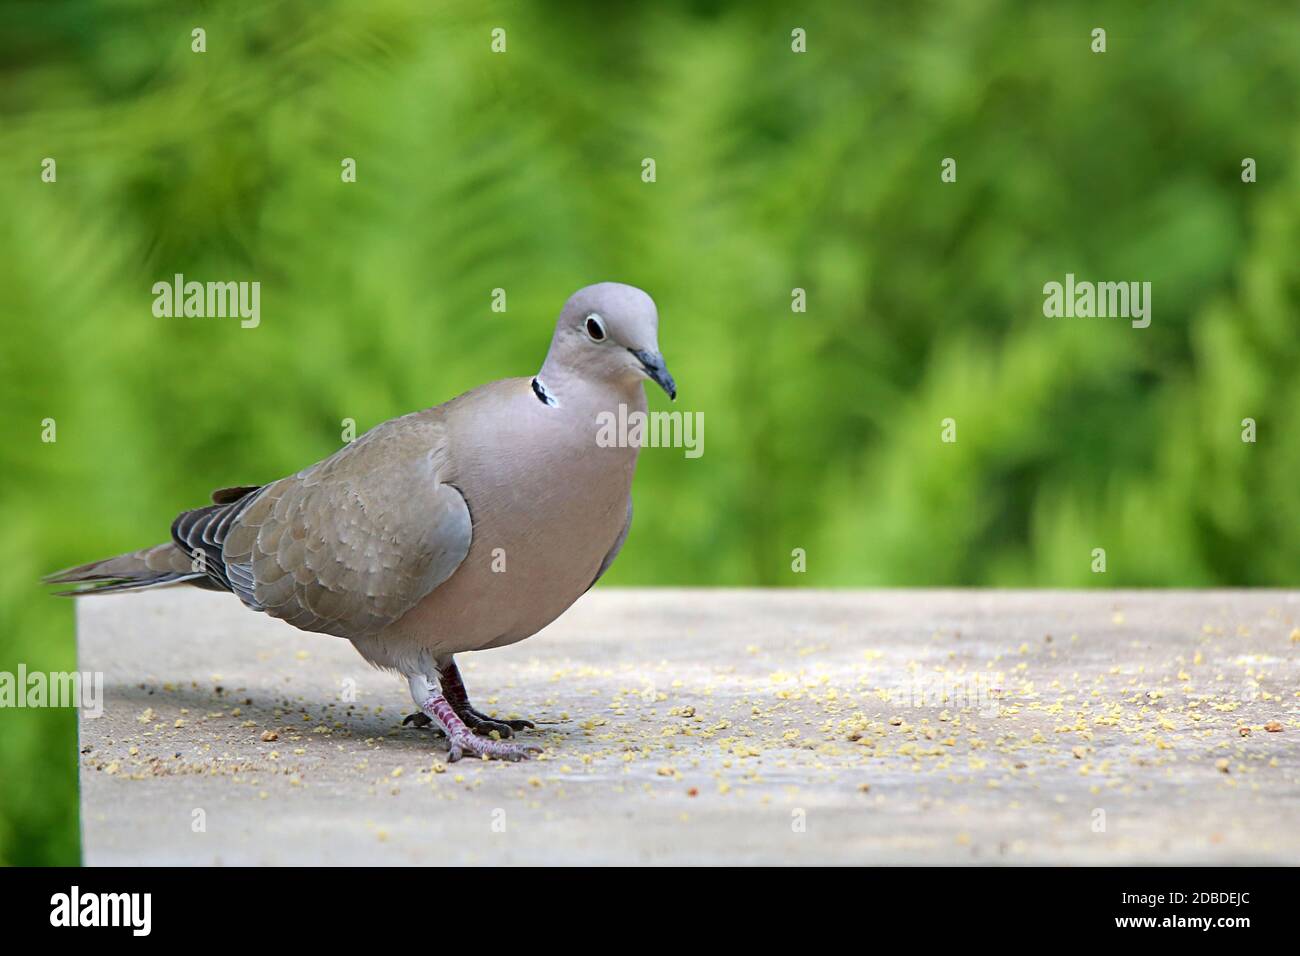 Turkish pigeon Streptopelia decaocto in foraging Stock Photo